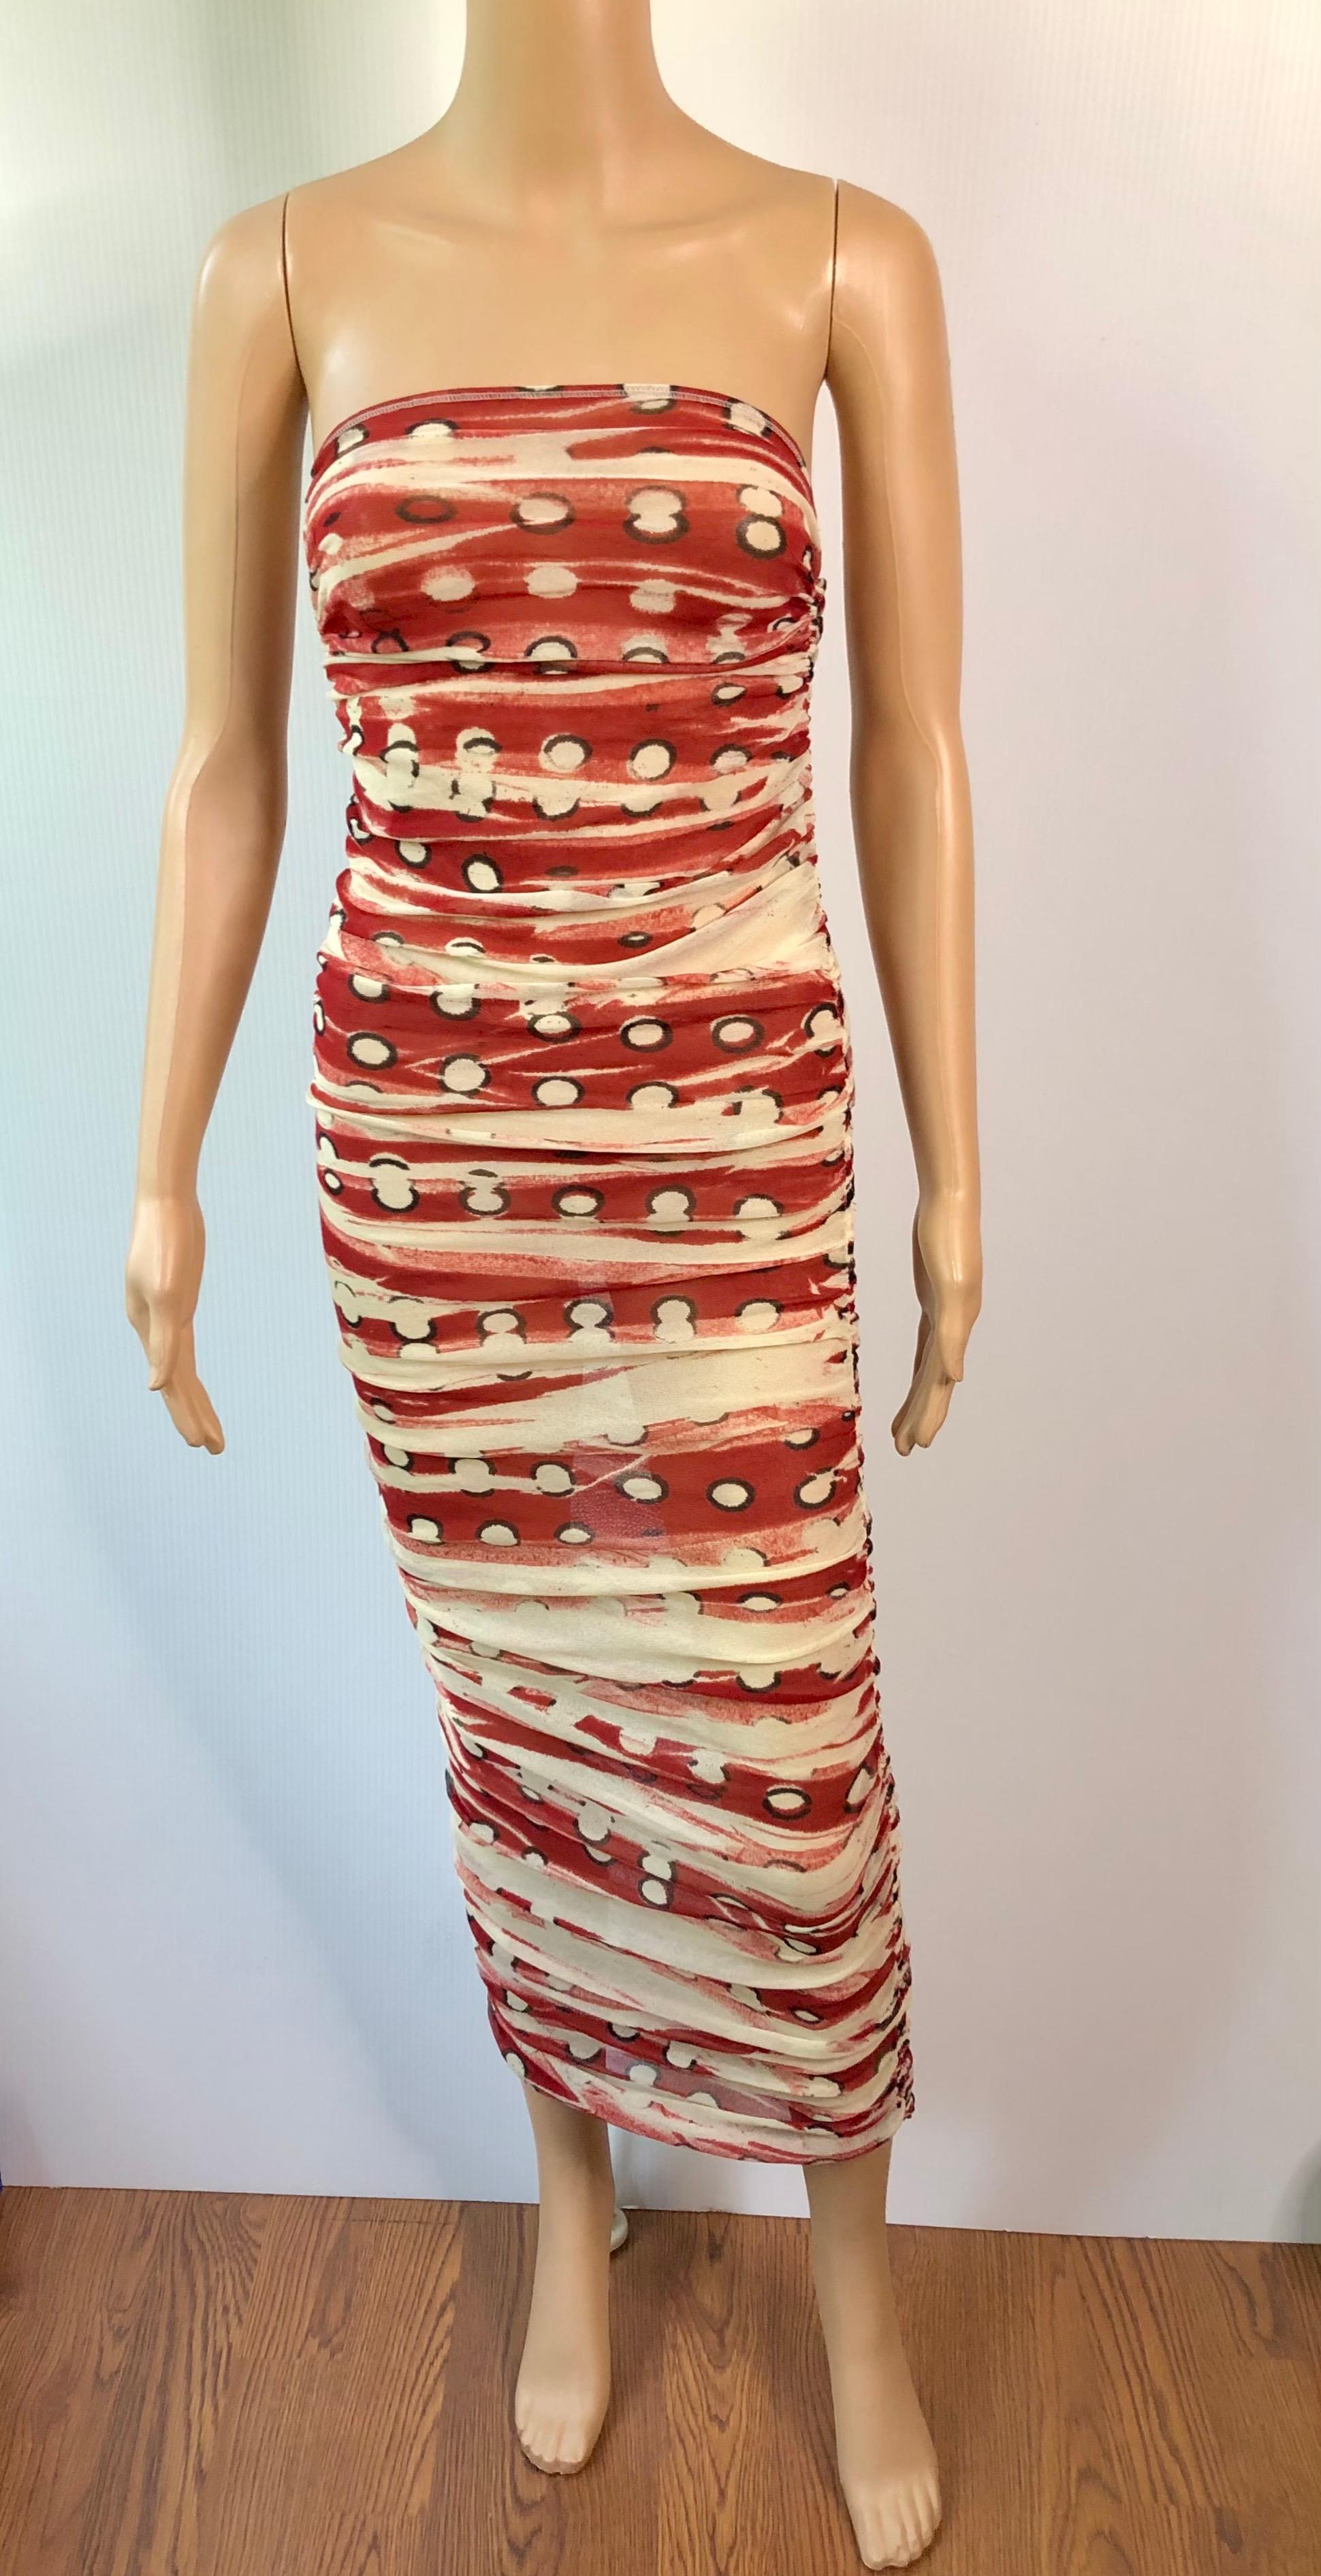 Jean Paul Gaultier Soleil F/W 2001 Ruched Semi-Sheer Mesh Maxi Dress Size M

Please note this piece is very versatile and it could be styled as a strapless dress or a maxi skirt as worn by Kylie Jenner.